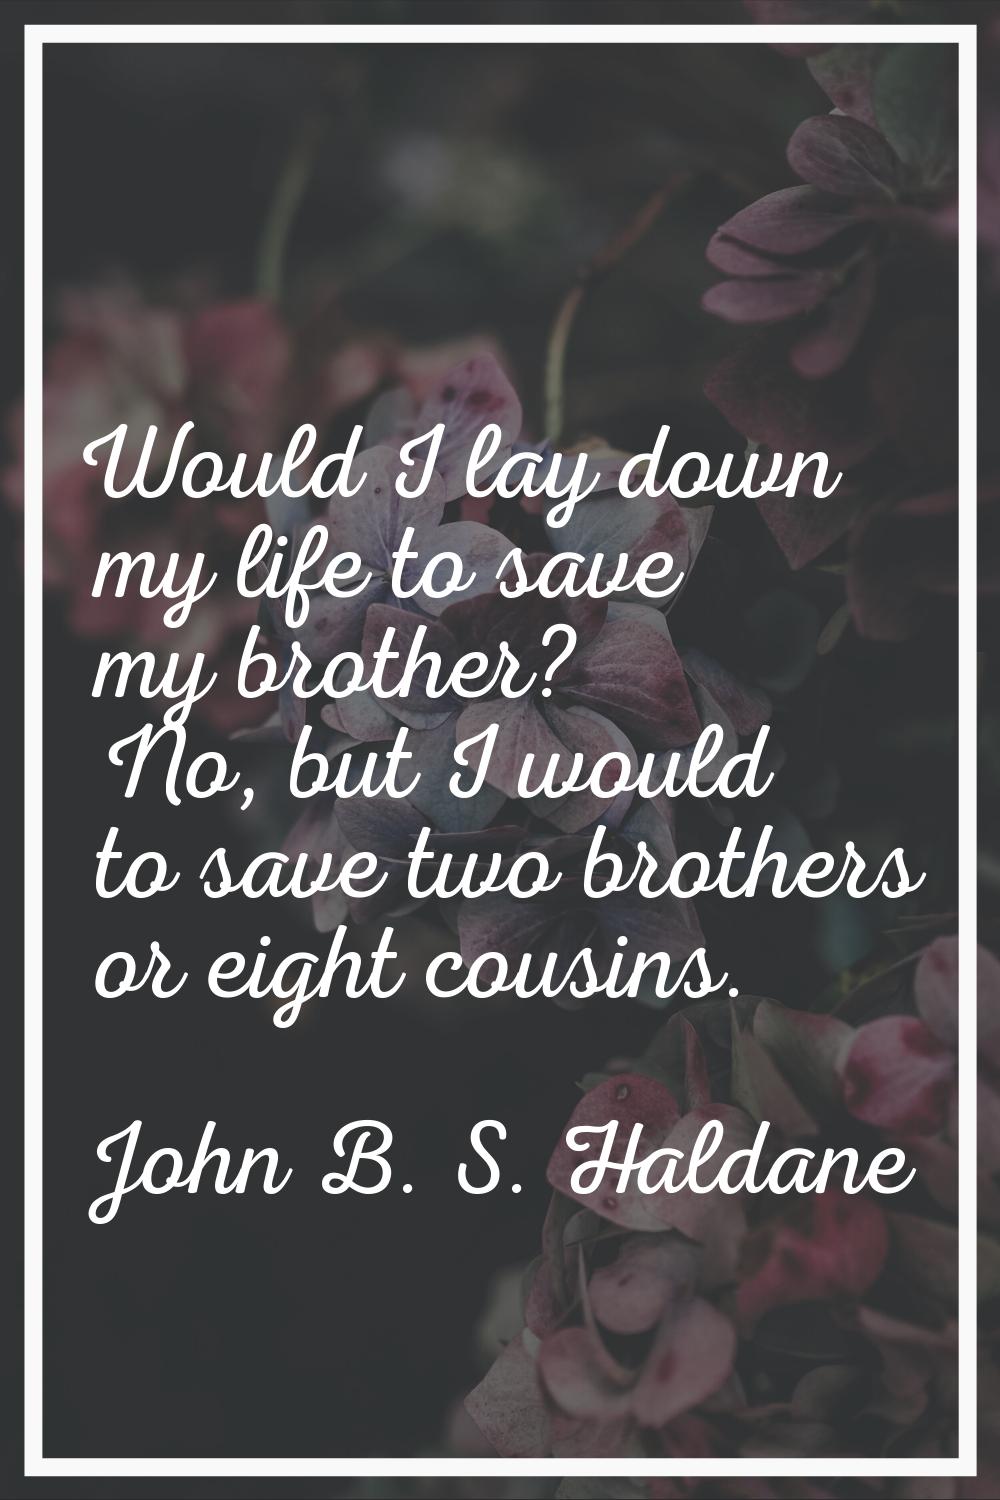 Would I lay down my life to save my brother? No, but I would to save two brothers or eight cousins.